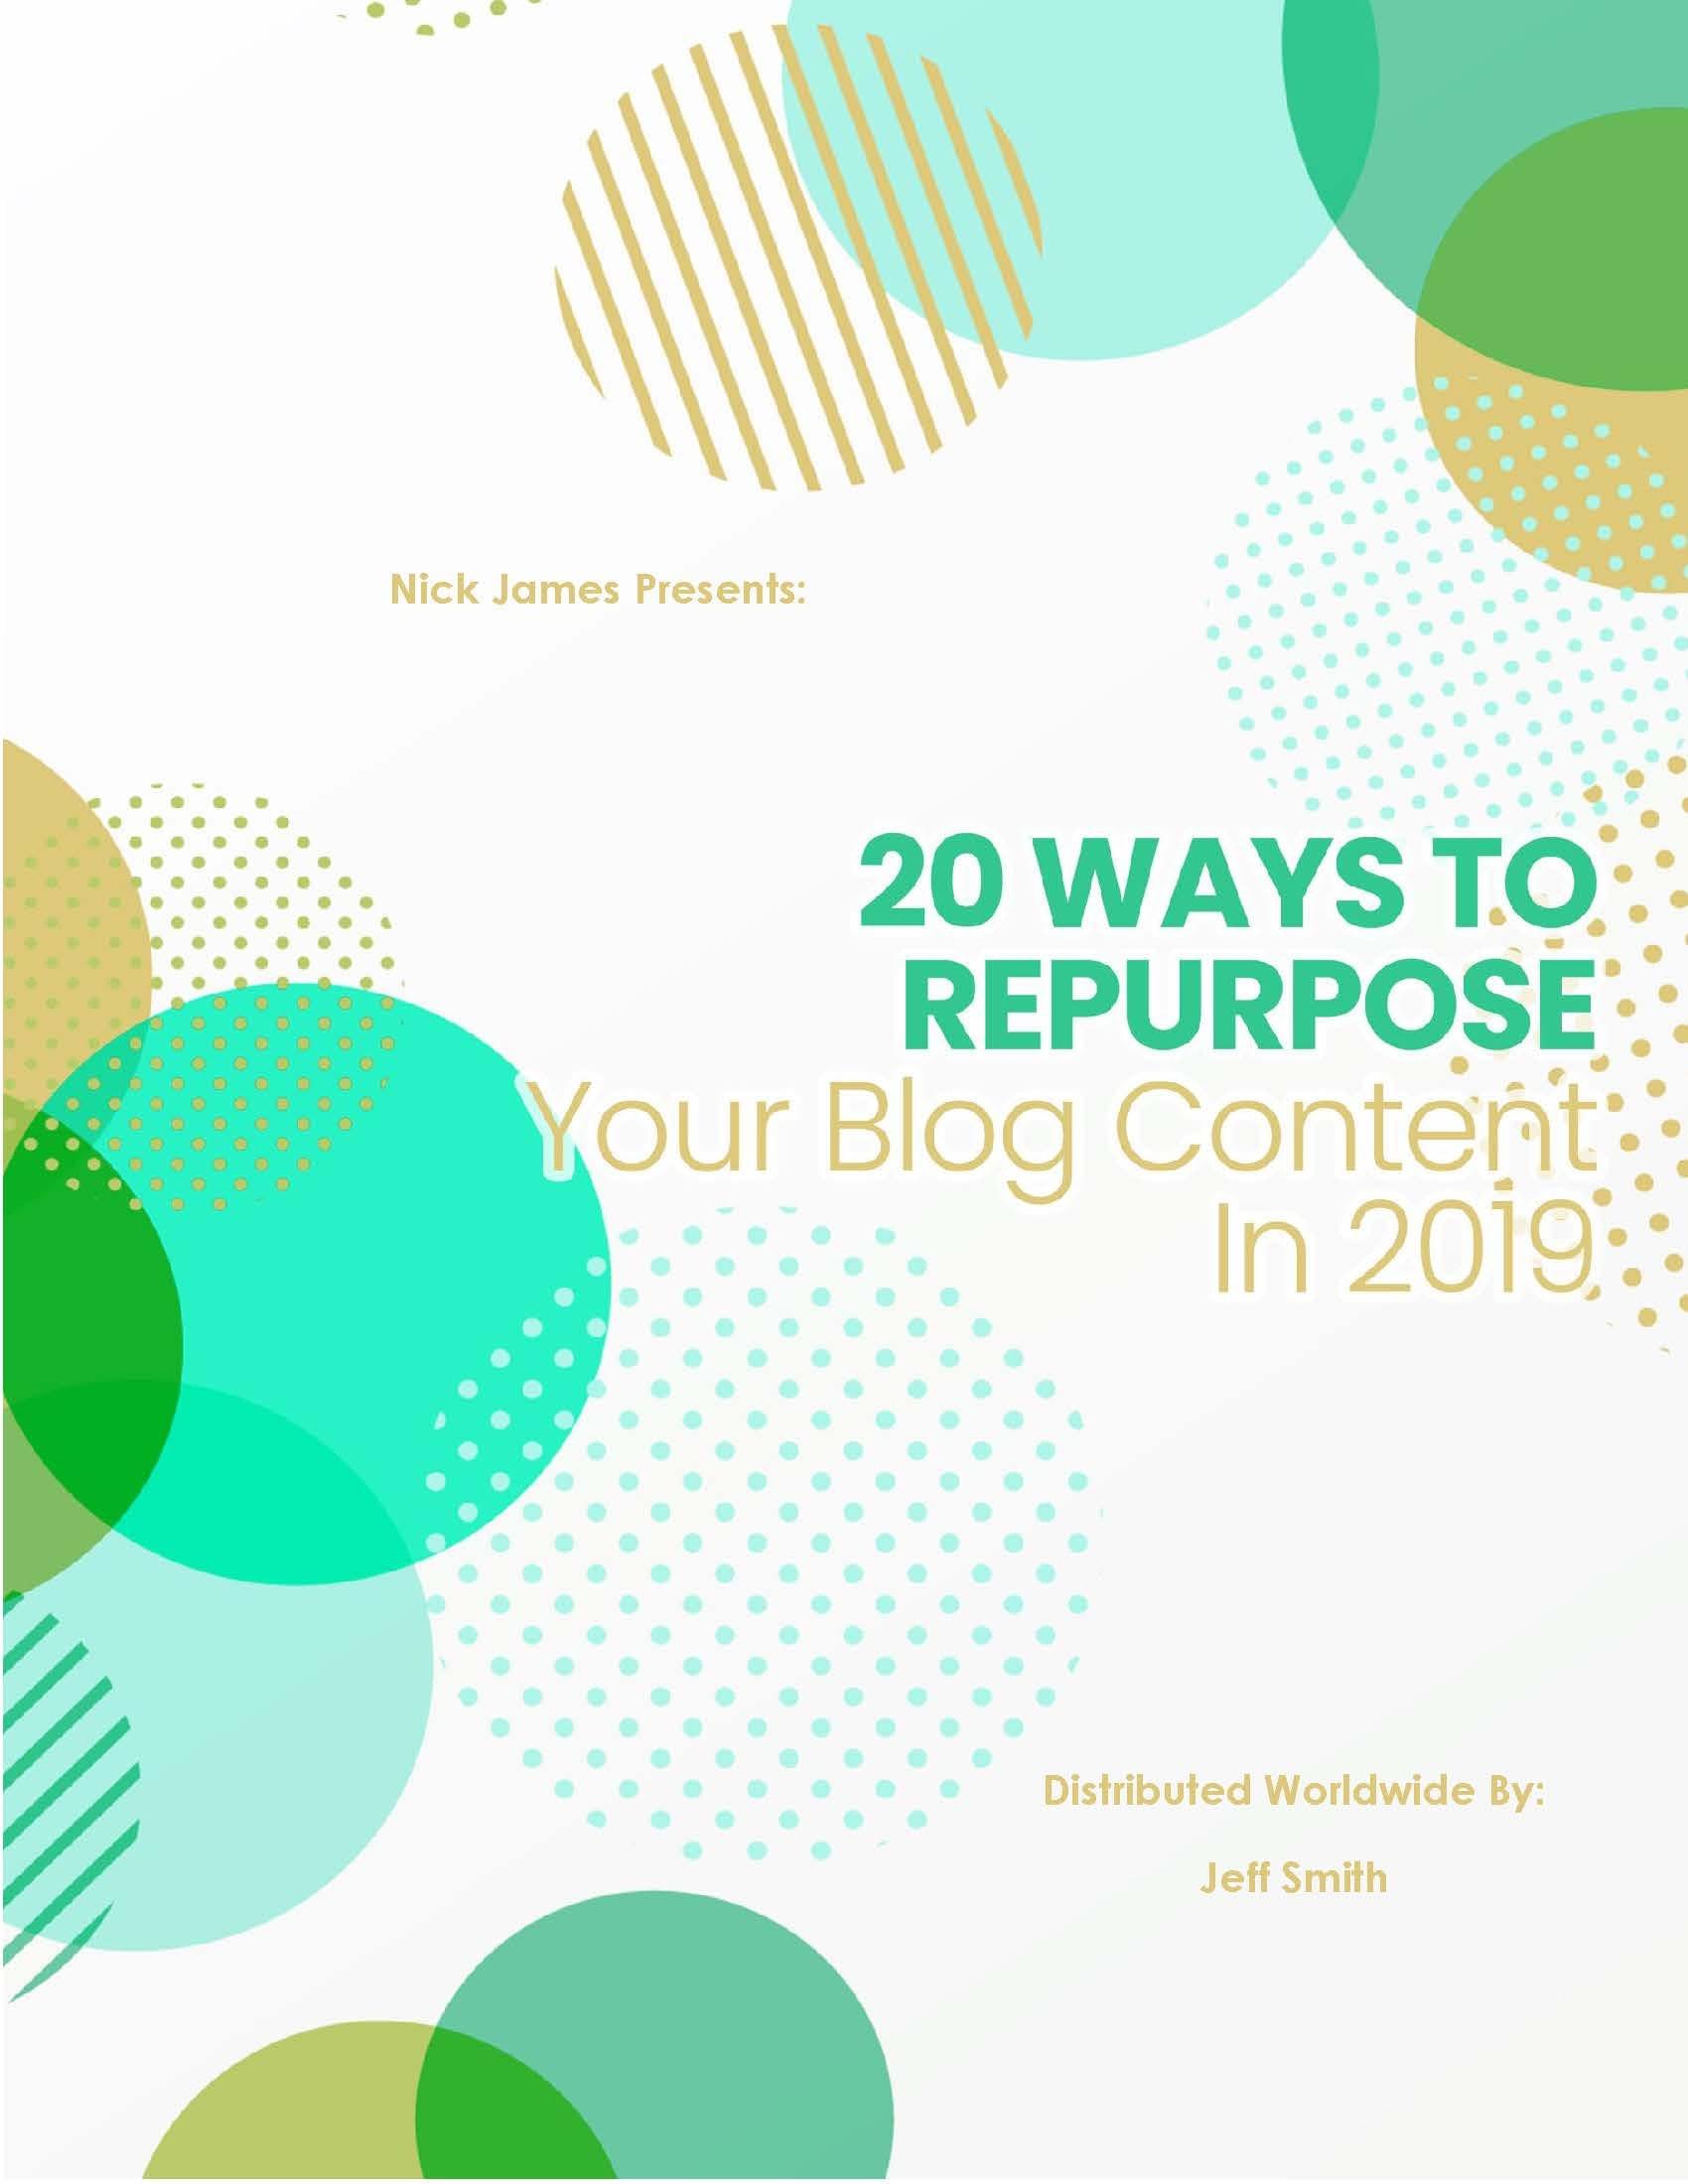 20 Ways To Repurpose Your Blog Content In 2019